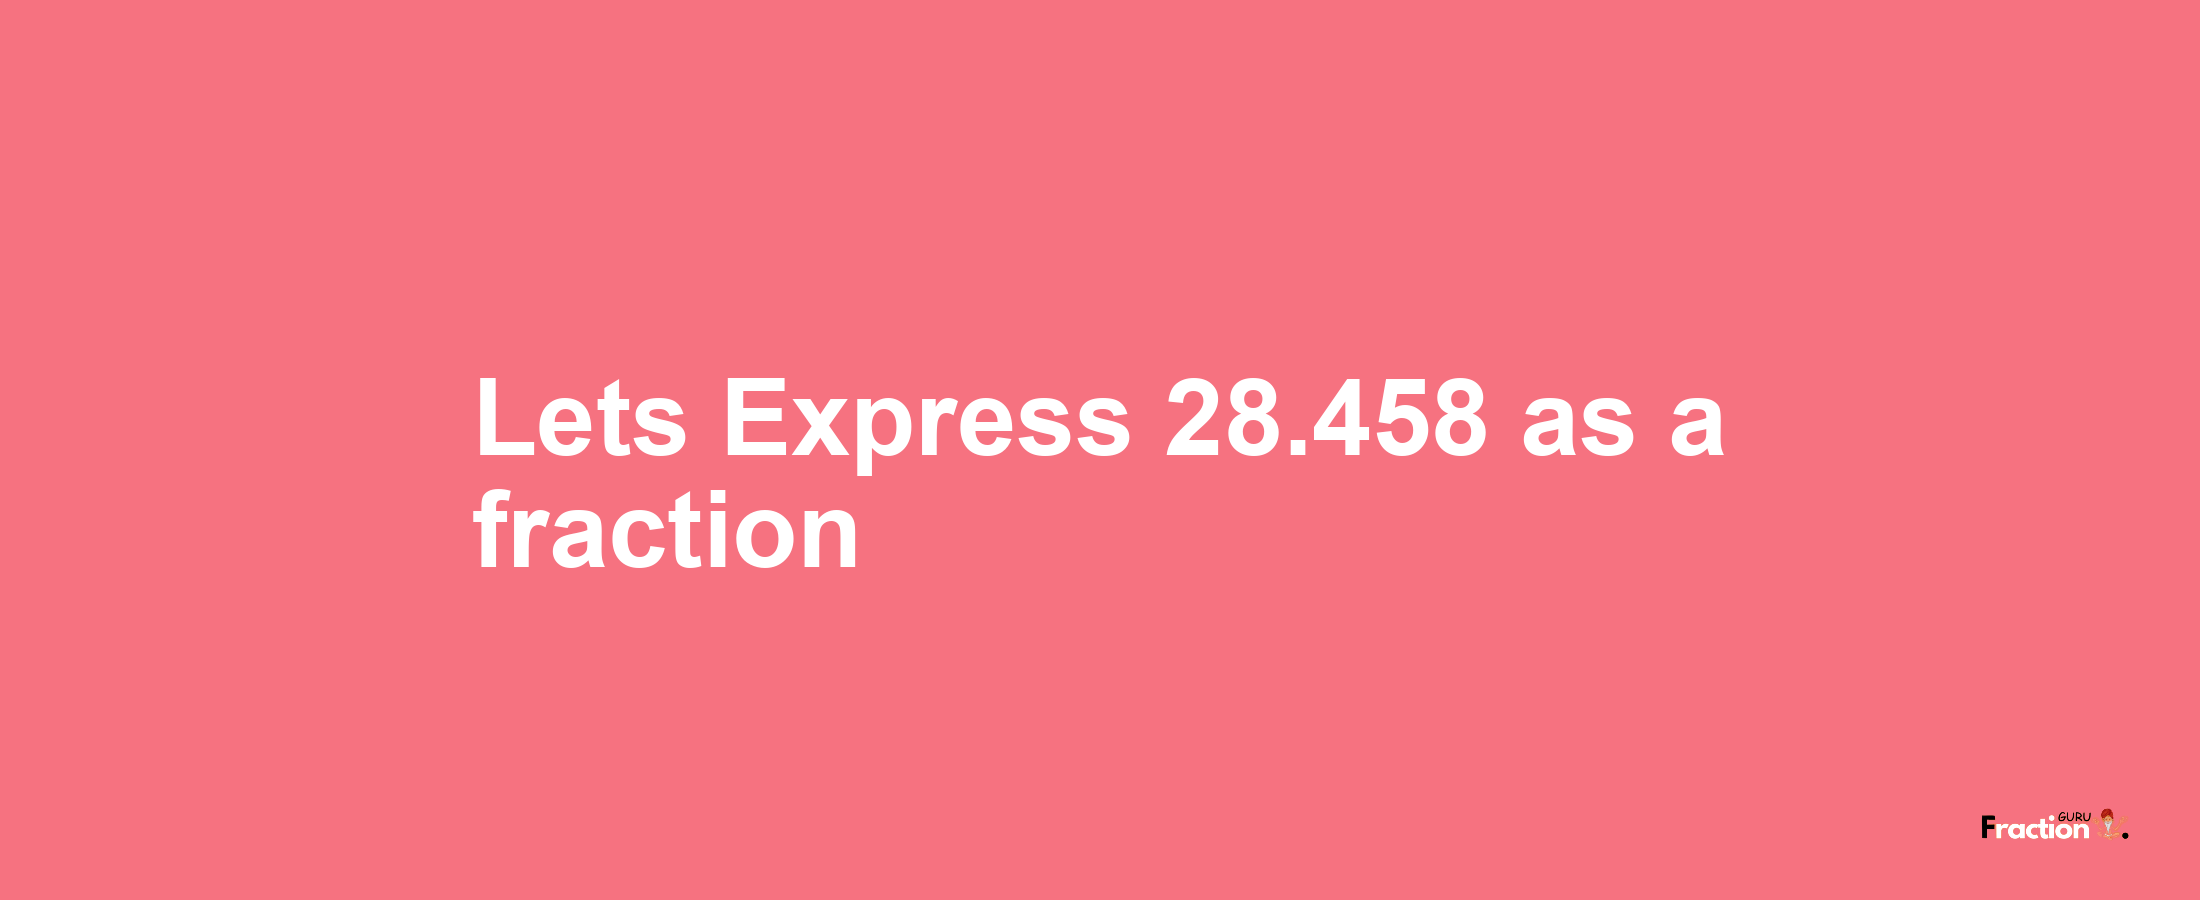 Lets Express 28.458 as afraction